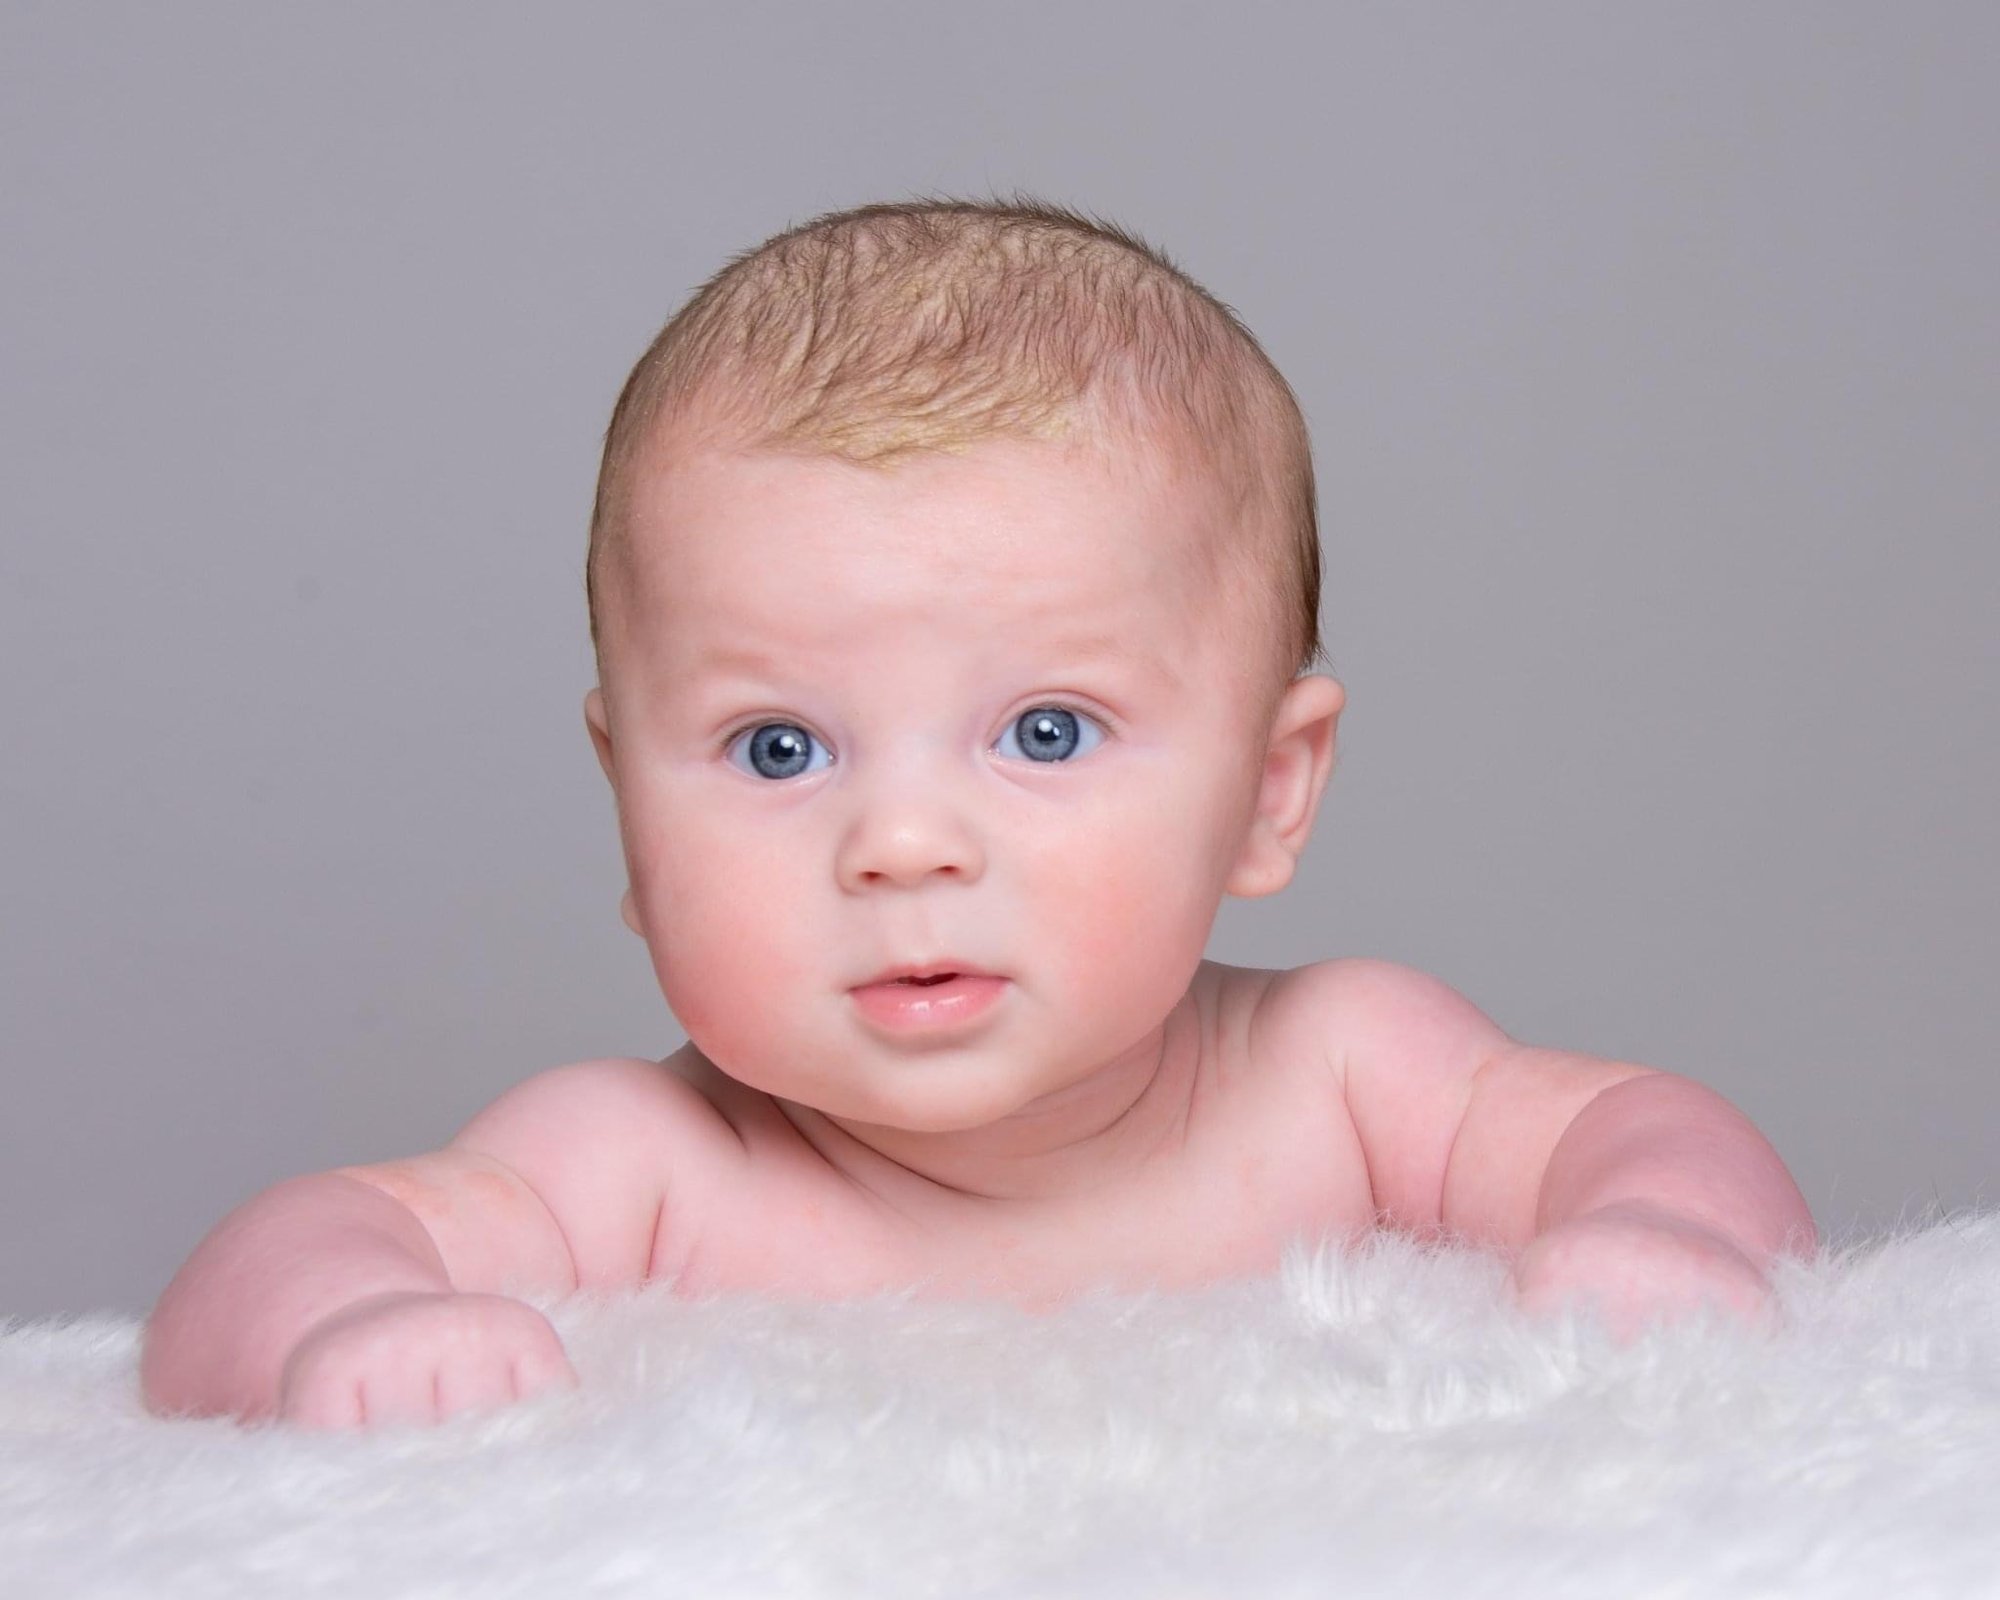 Baby Daniel with blue eyes, whose parents went through IVF treatment. 